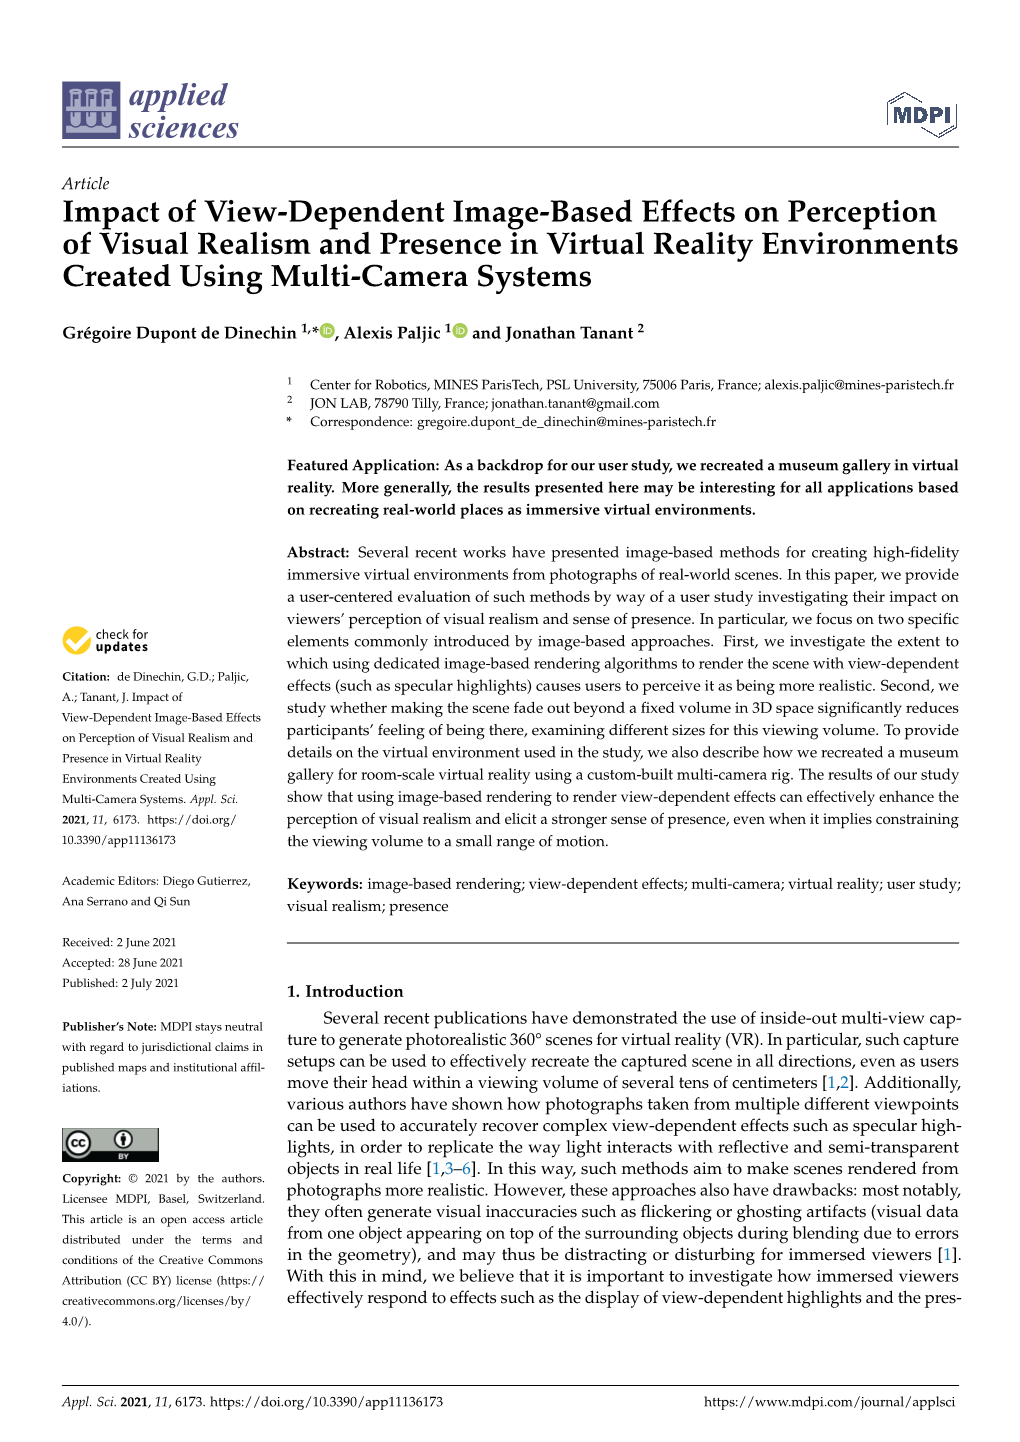 Impact of View-Dependent Image-Based Effects on Perception of Visual Realism and Presence in Virtual Reality Environments Created Using Multi-Camera Systems